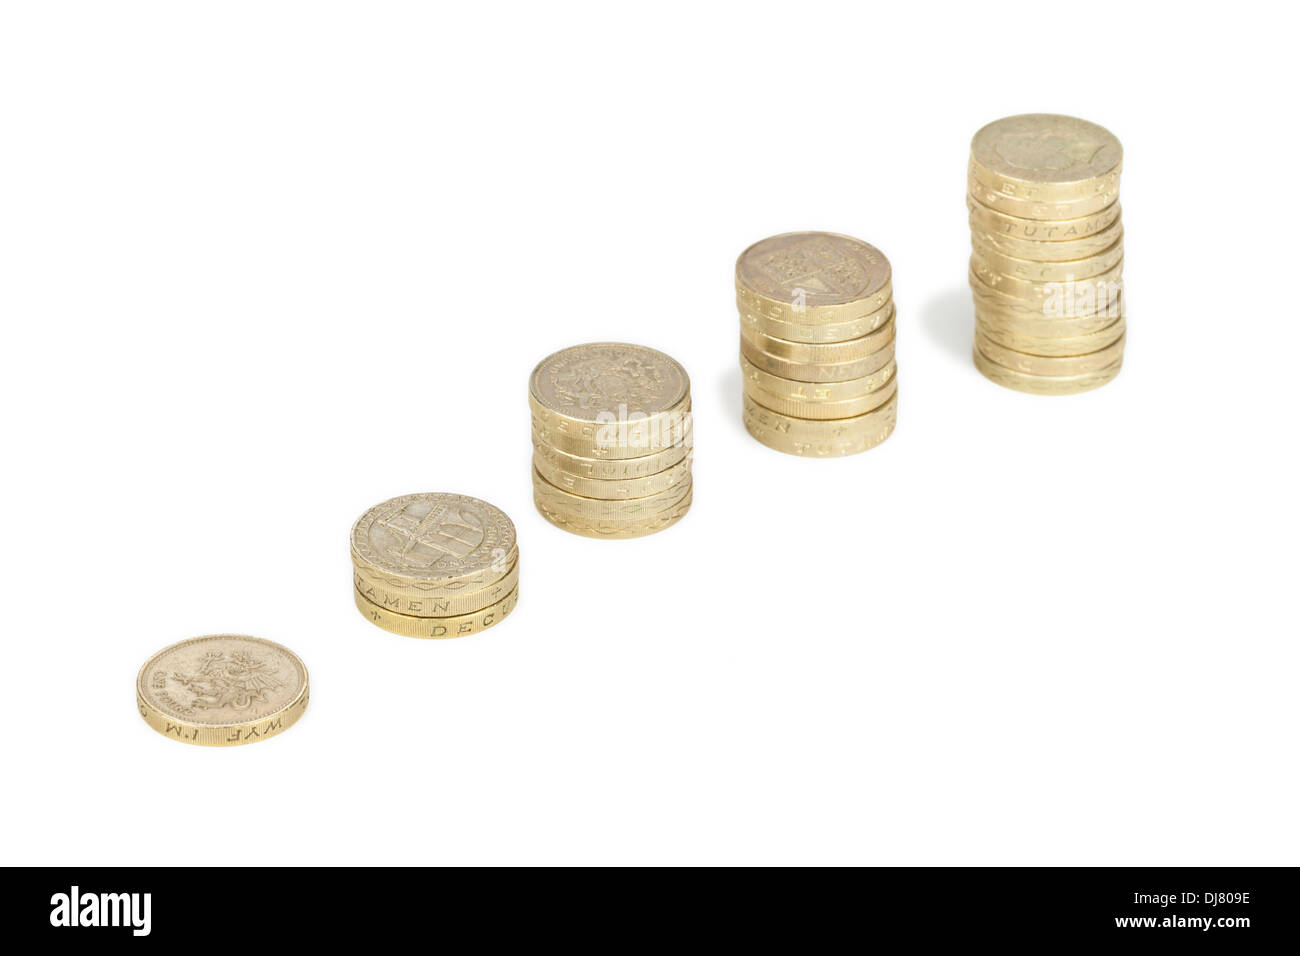 Piles of uk sterling pound coins Stock Photo